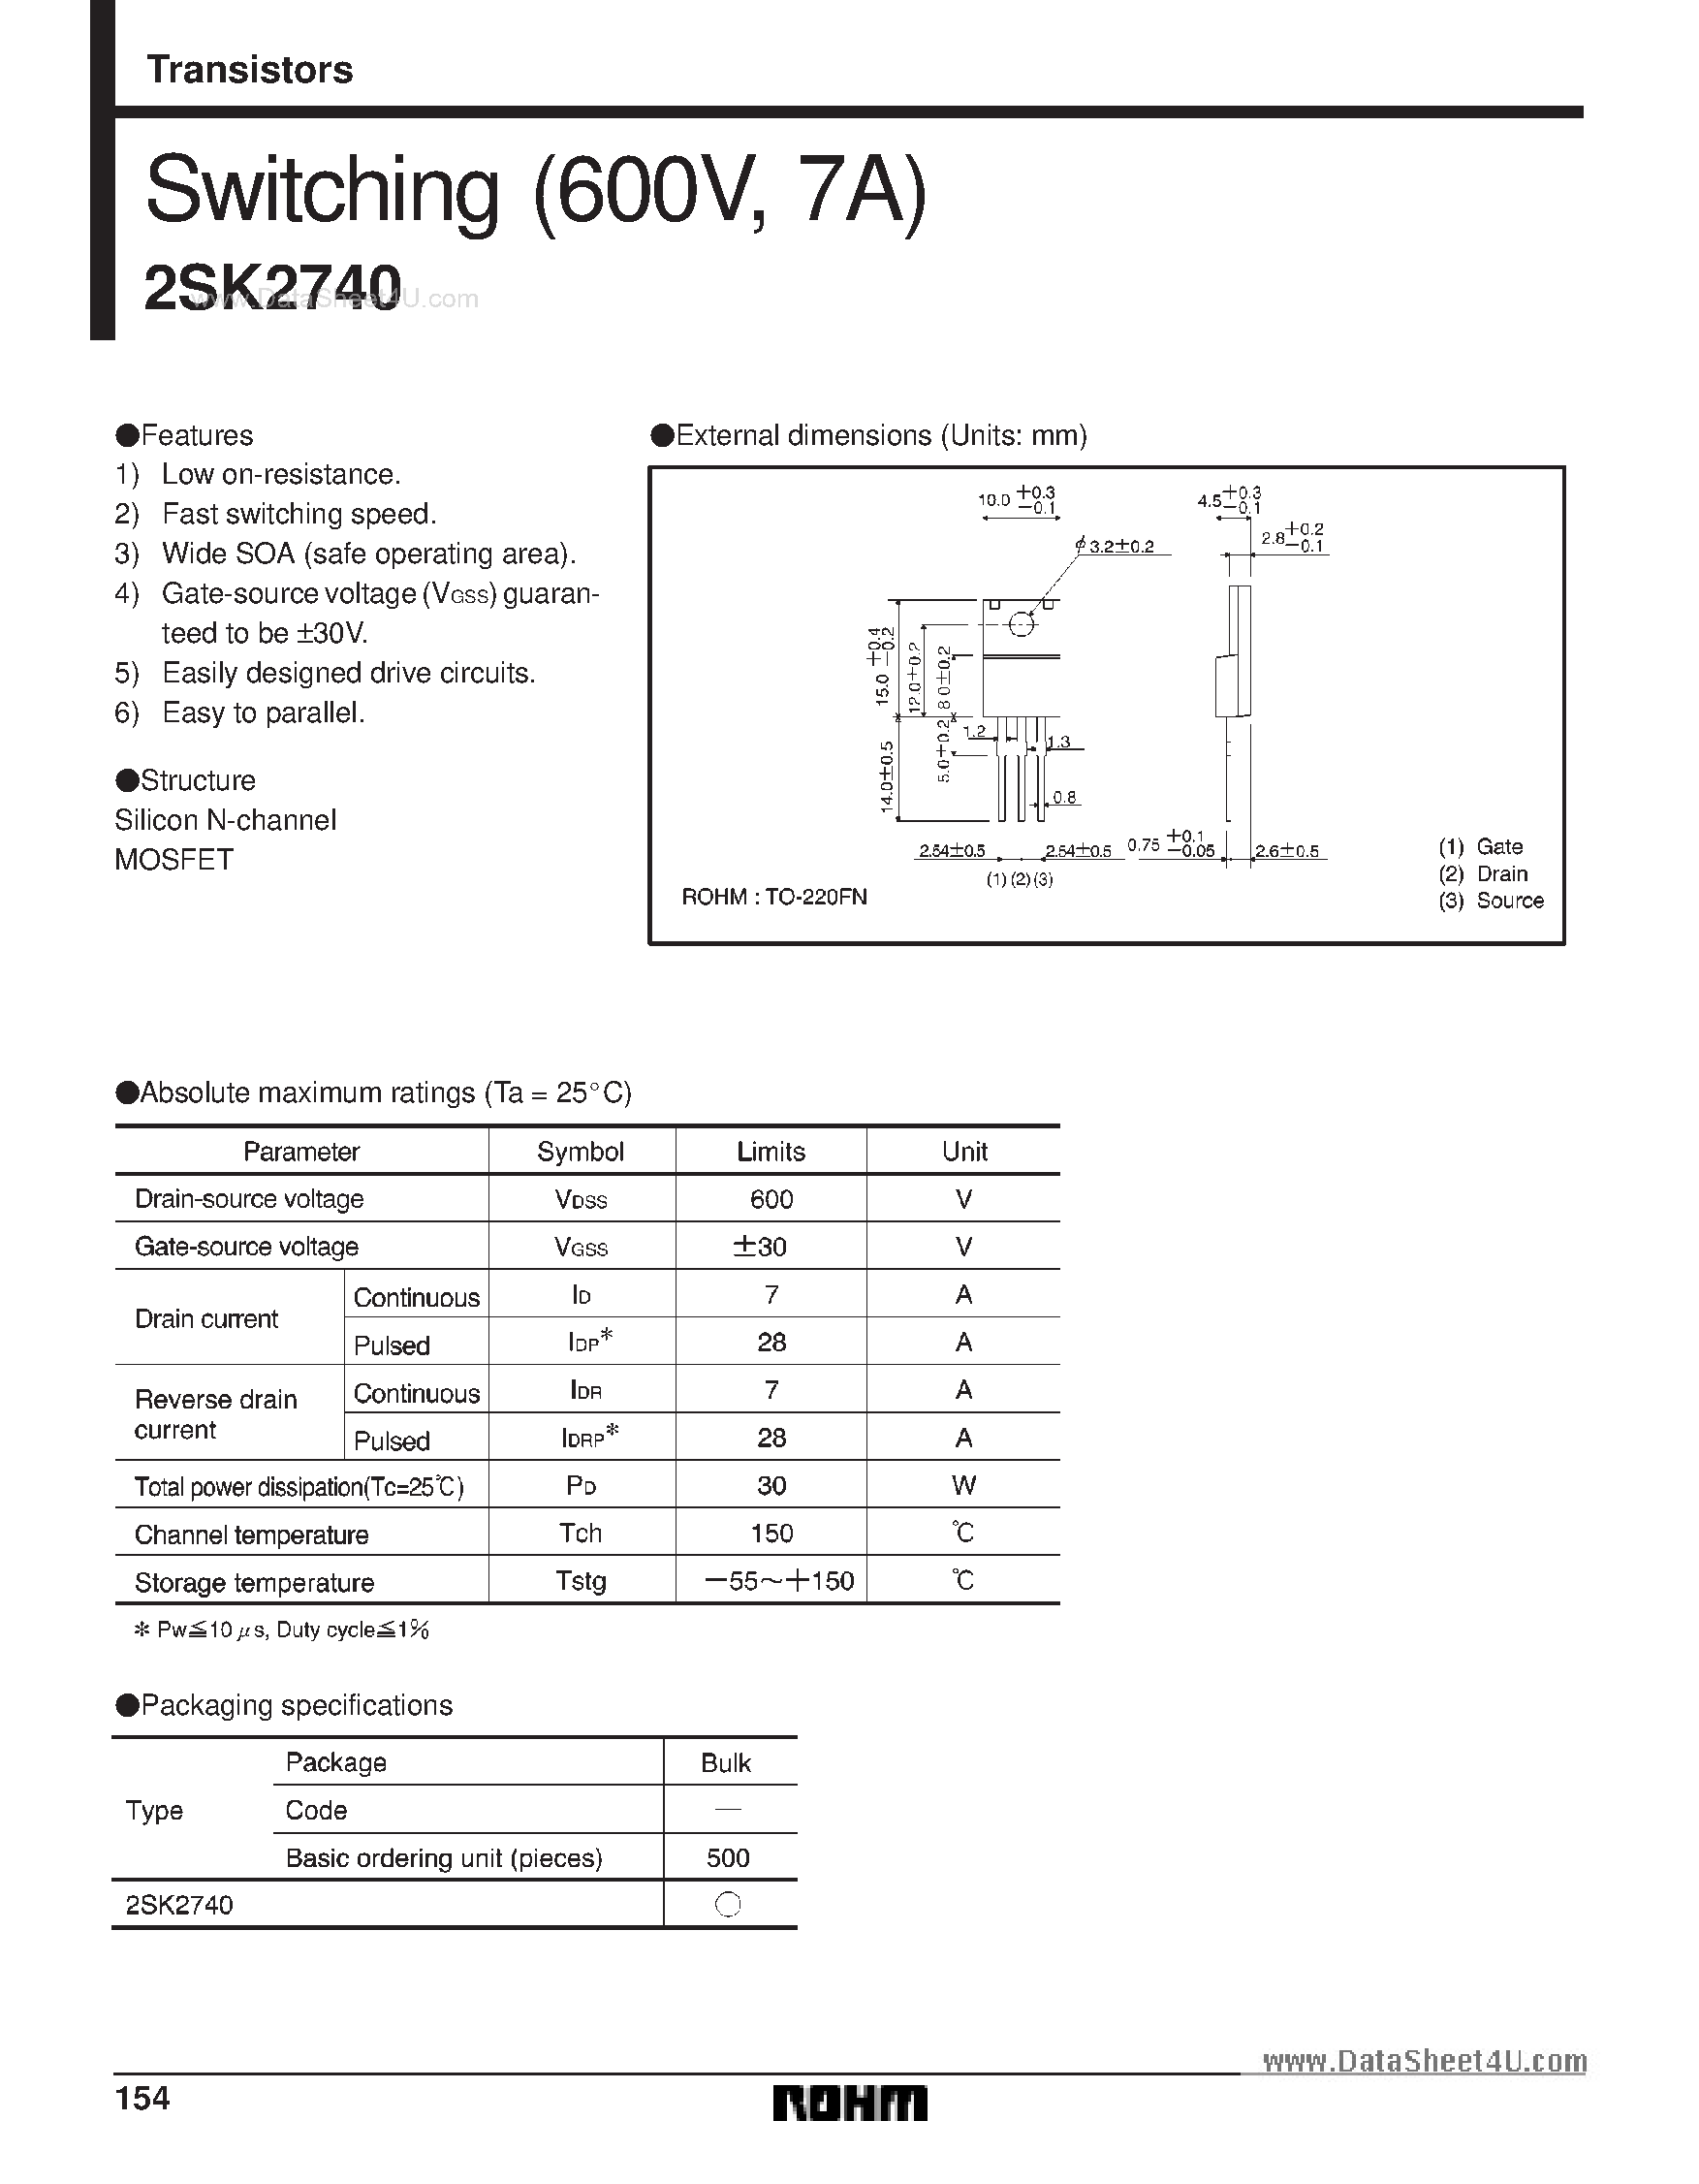 Datasheet K2740 - Search -----> 2SK2740 page 1